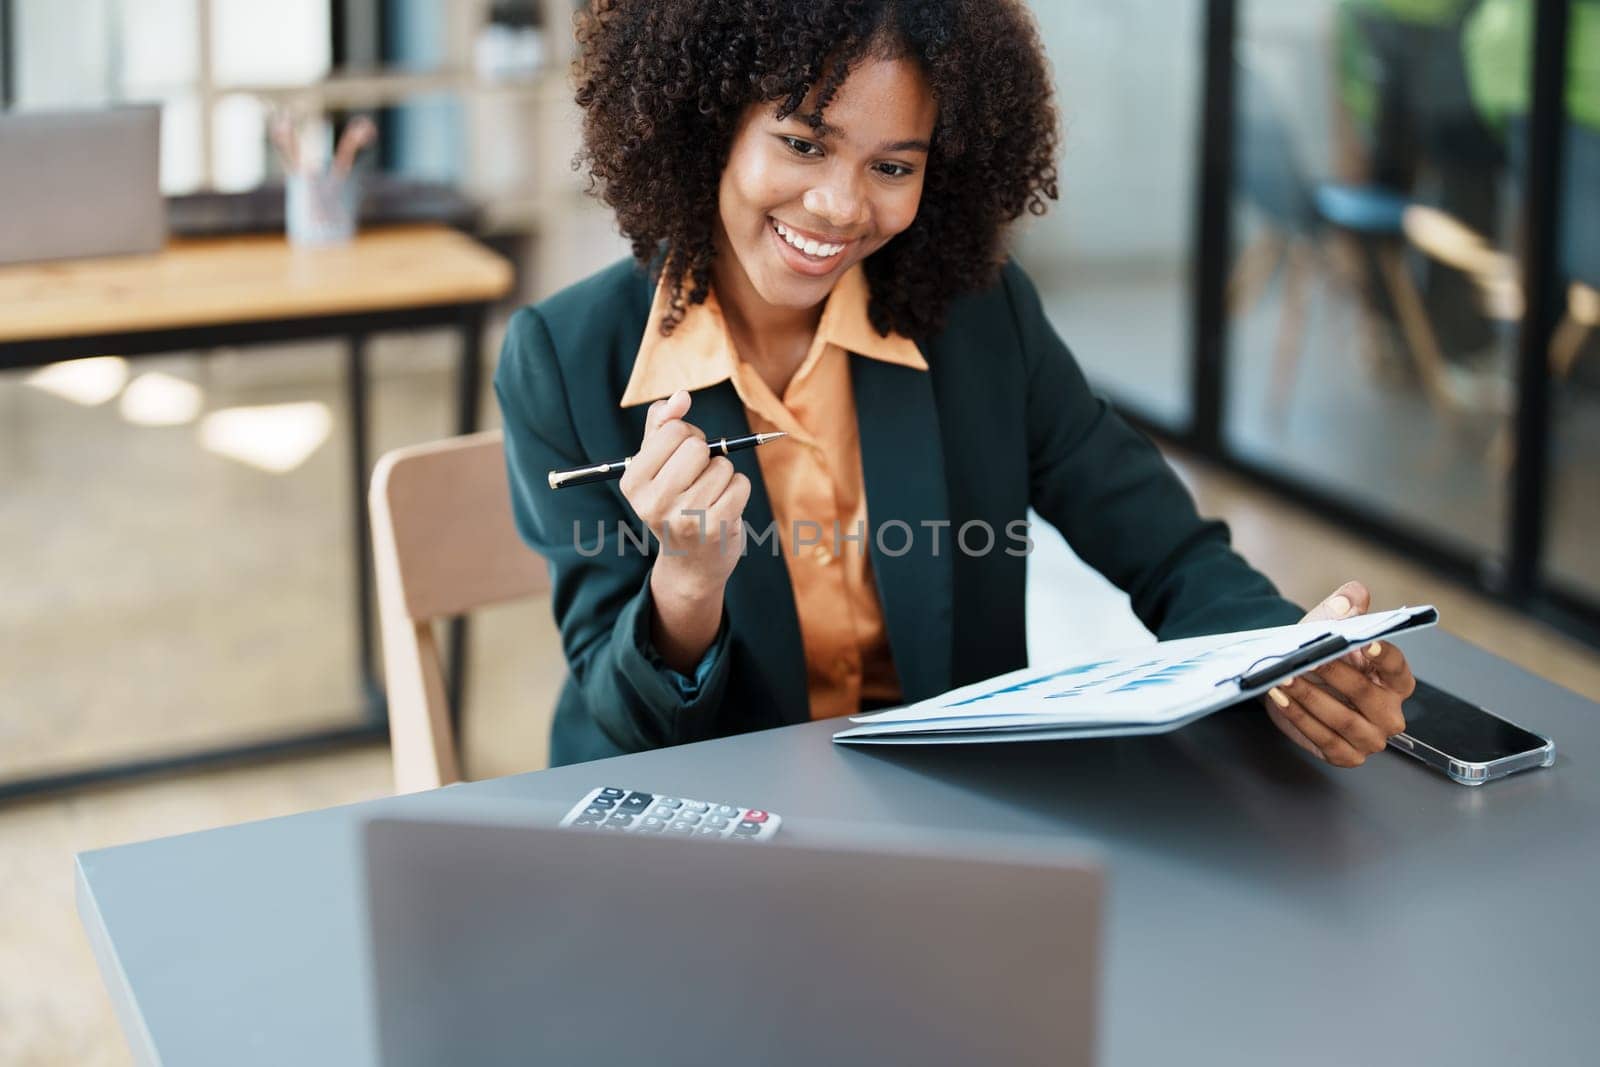 Beautiful young teen American African business women holding computer laptop with hands up in winner is gesture, Happy to be successful celebrating achievement success.